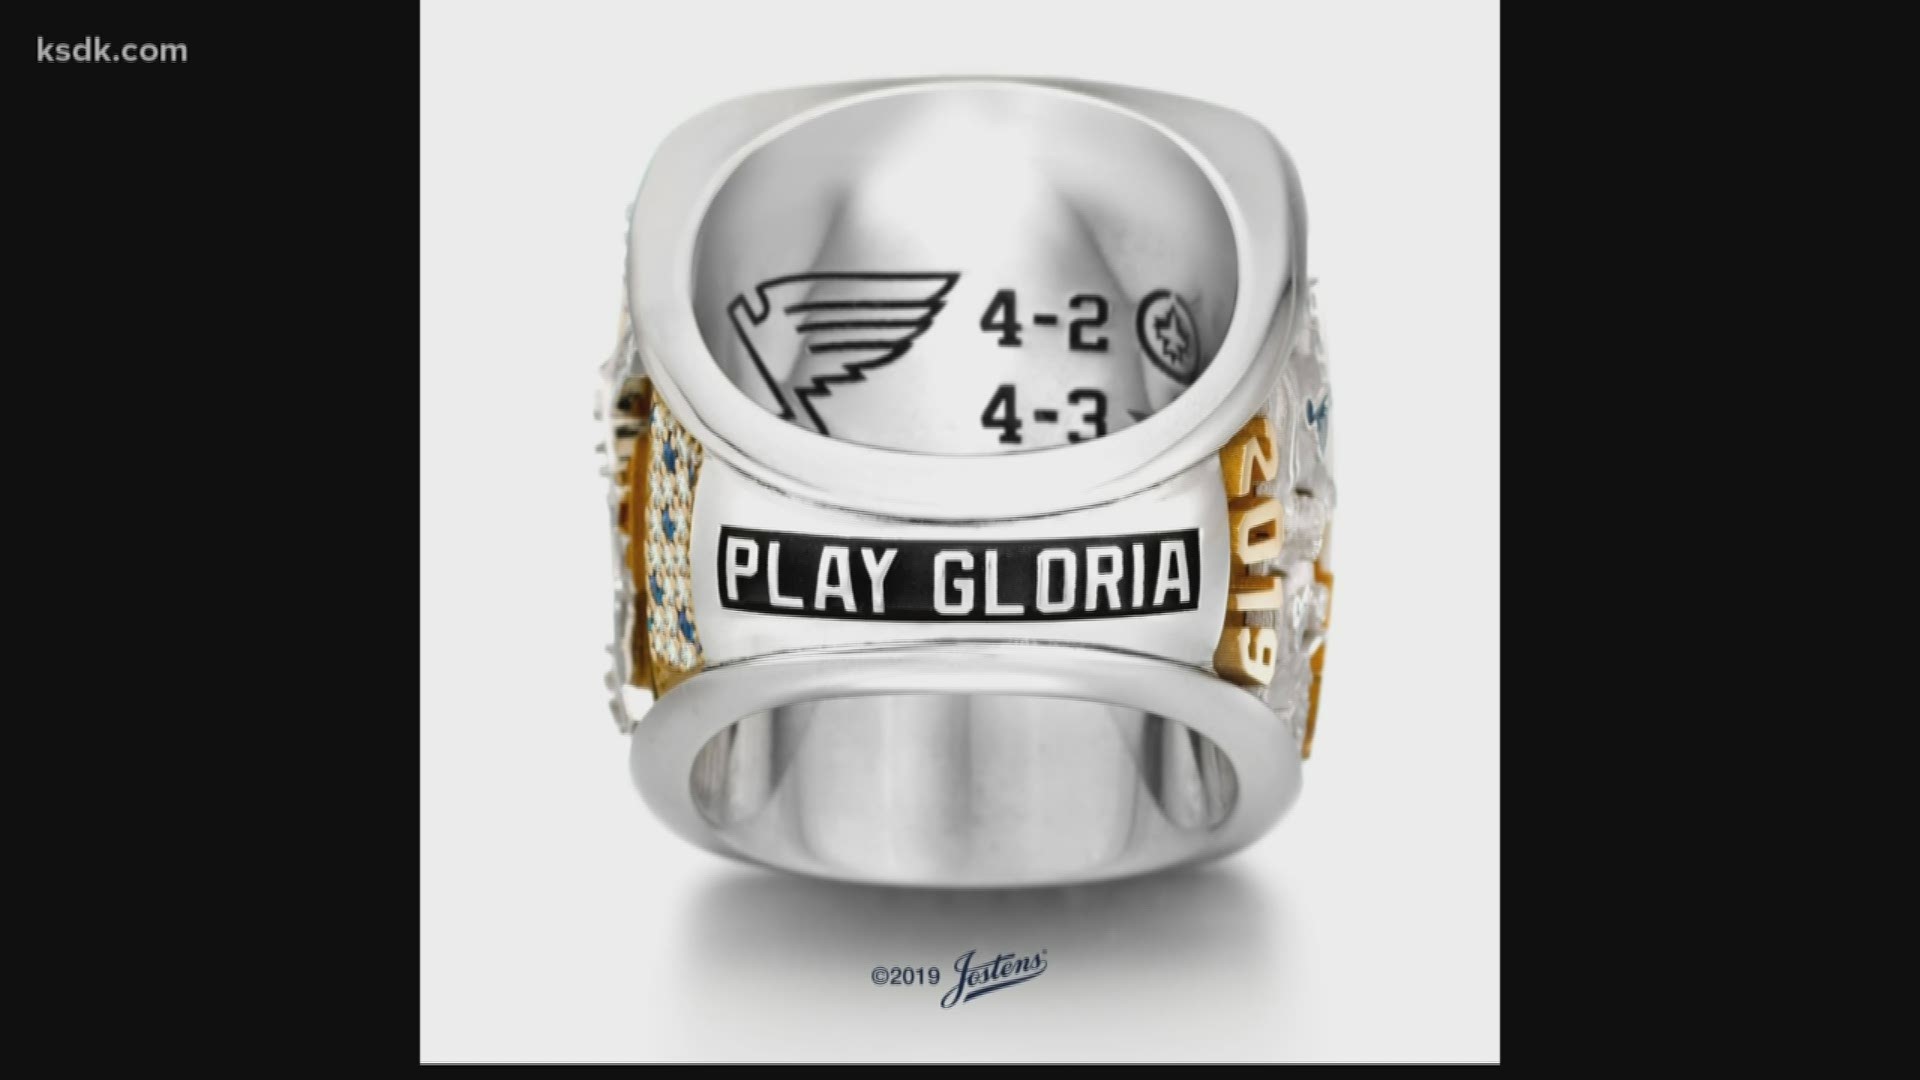 "The St. Louis Blues 2019 Championship Ring celebrates their journey and pays homage to the team, their fans and their city."